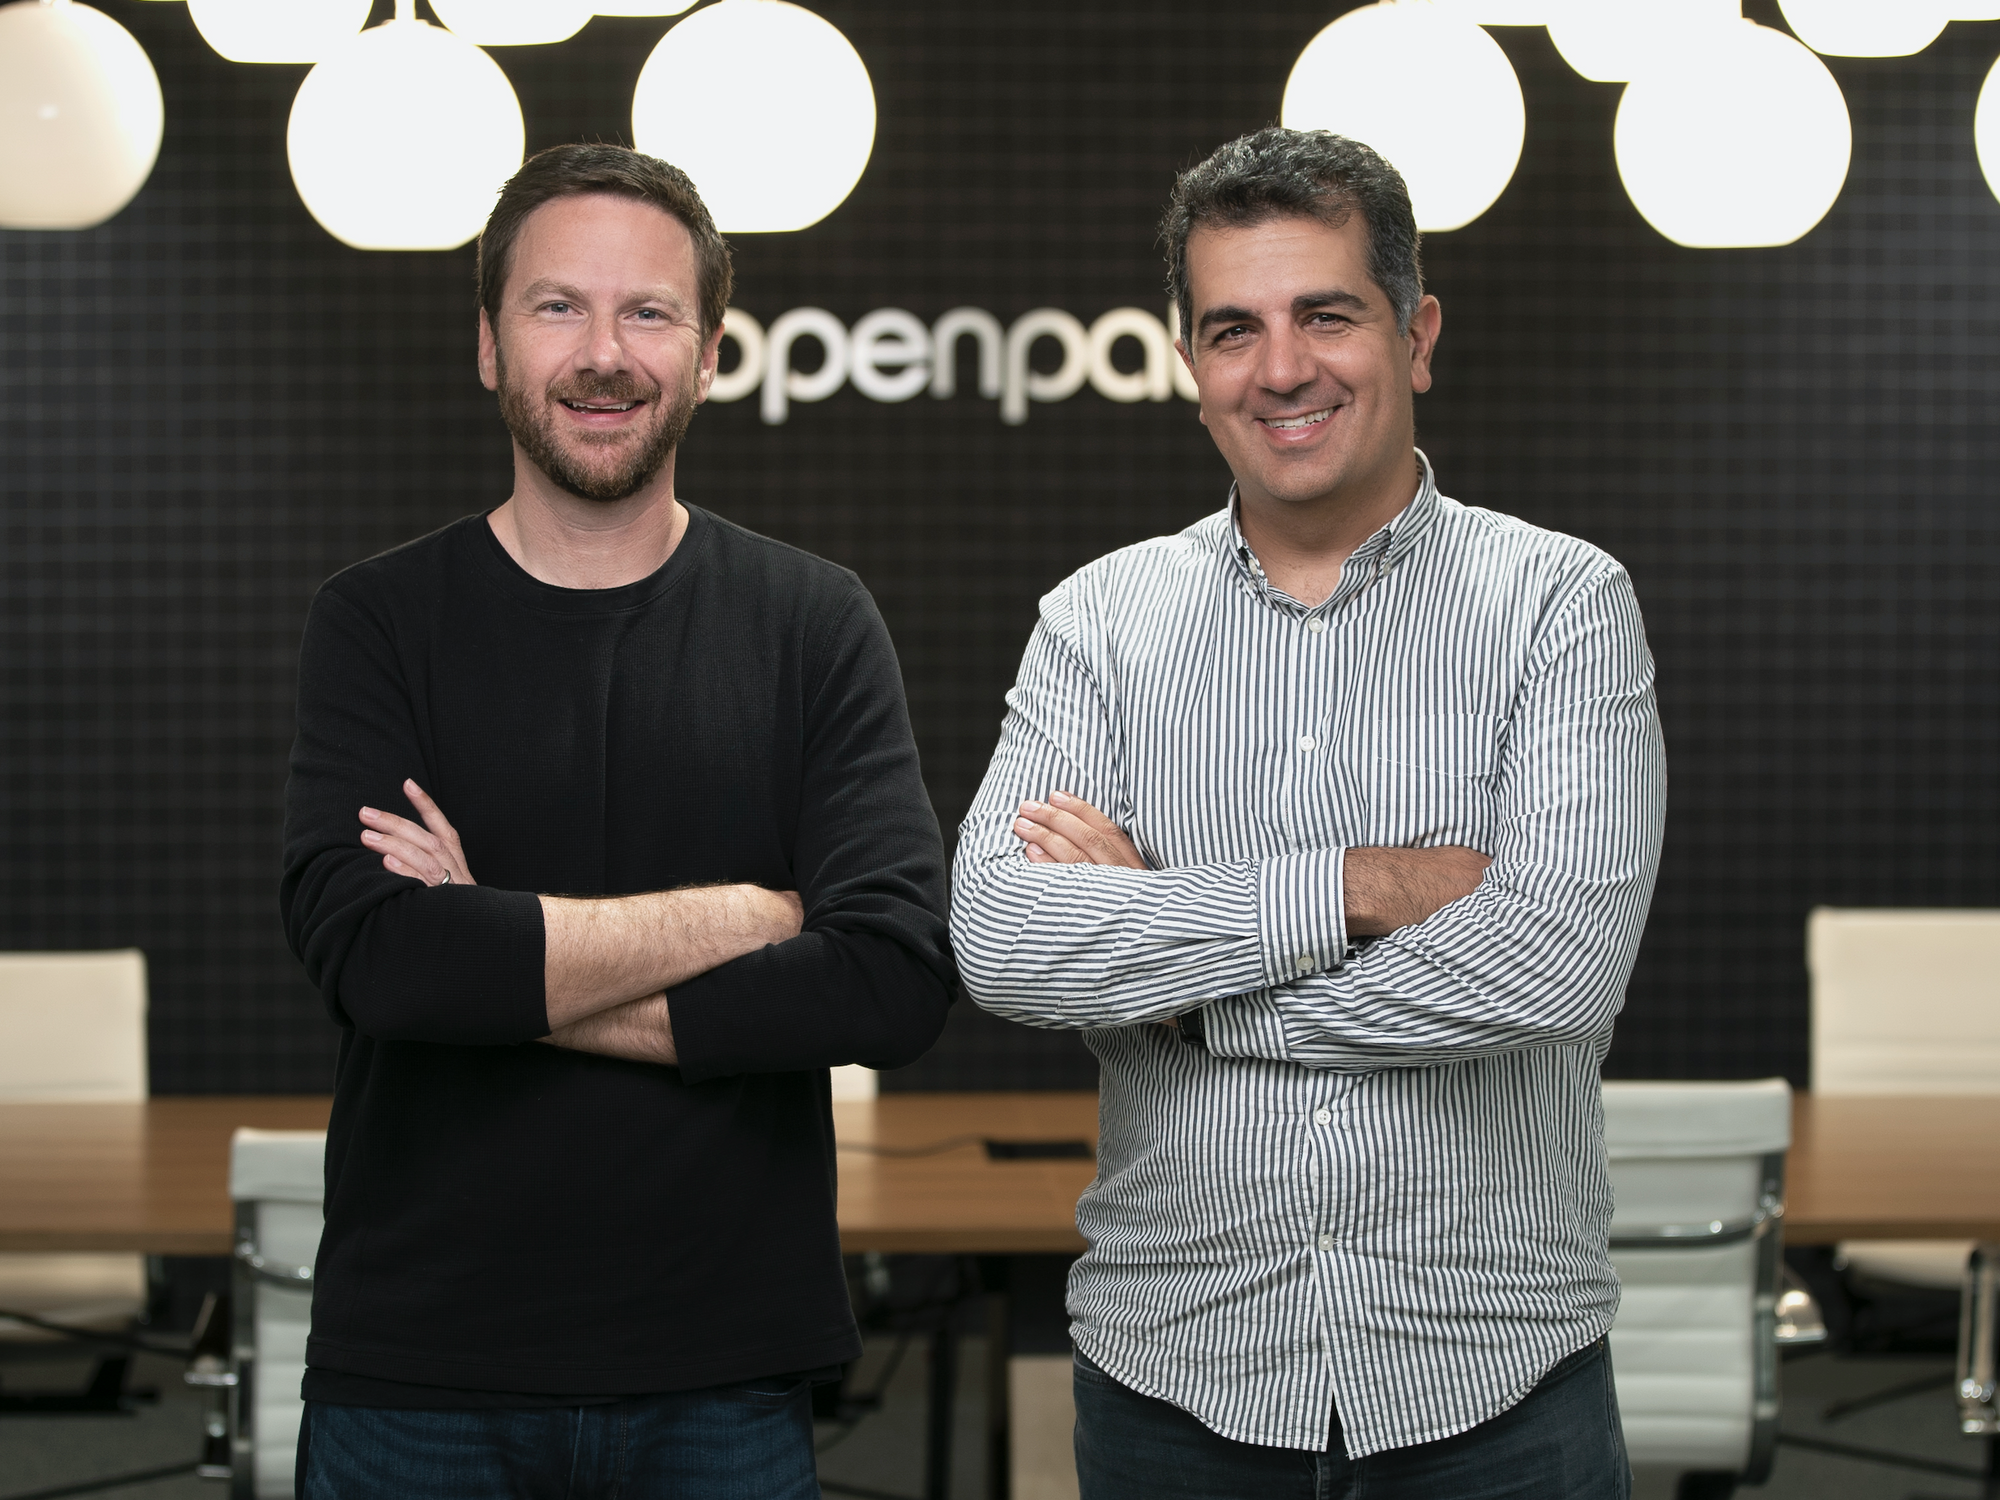 They've Sold Five LA Tech Companies and Just Raised $36 Million. Meet the Founders Behind Openpath.